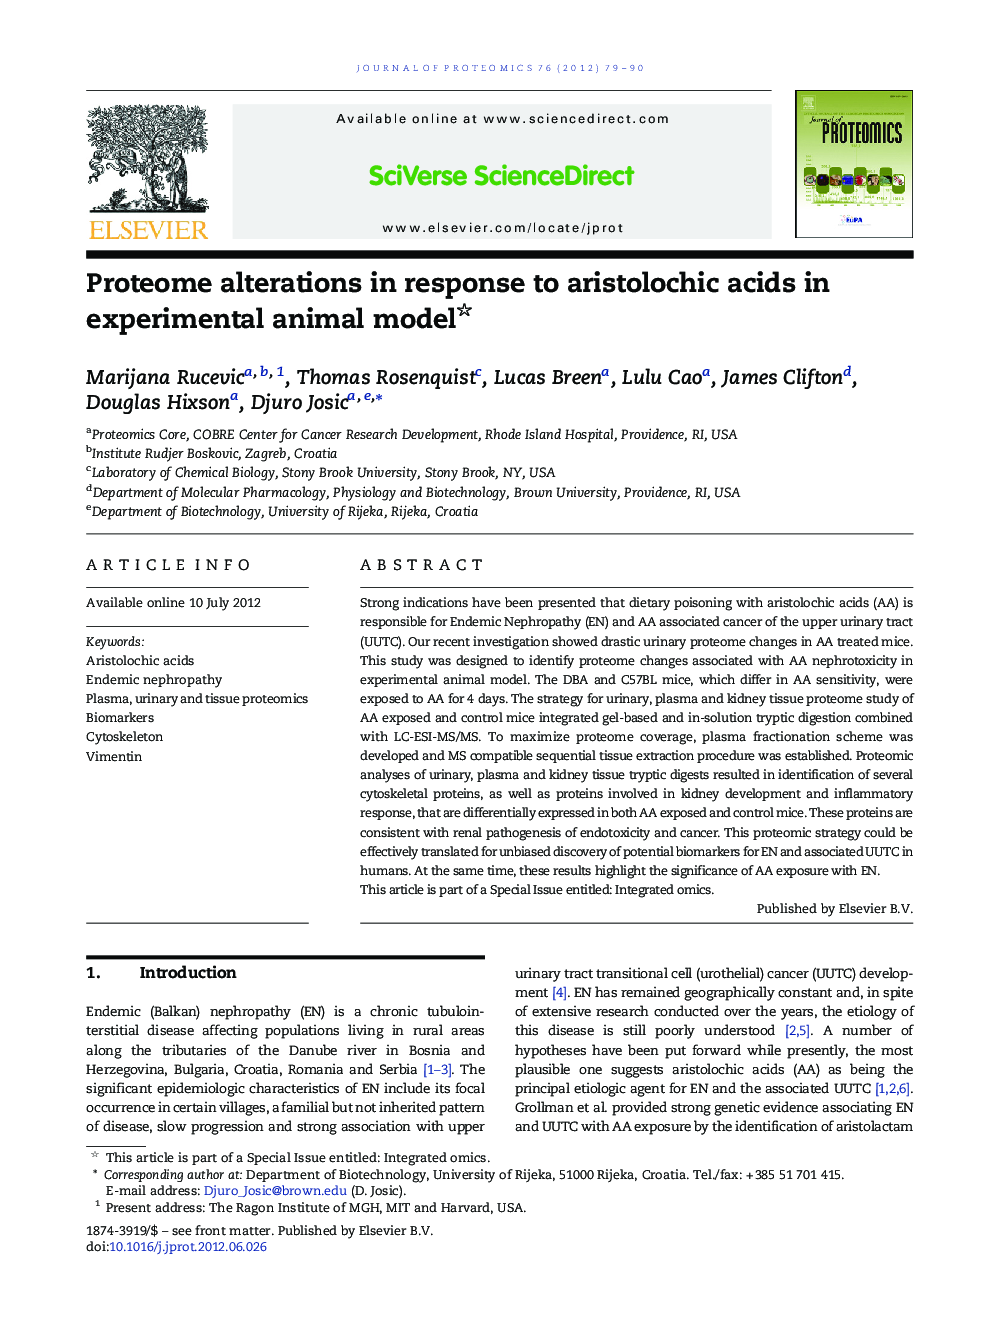 Proteome alterations in response to aristolochic acids in experimental animal model